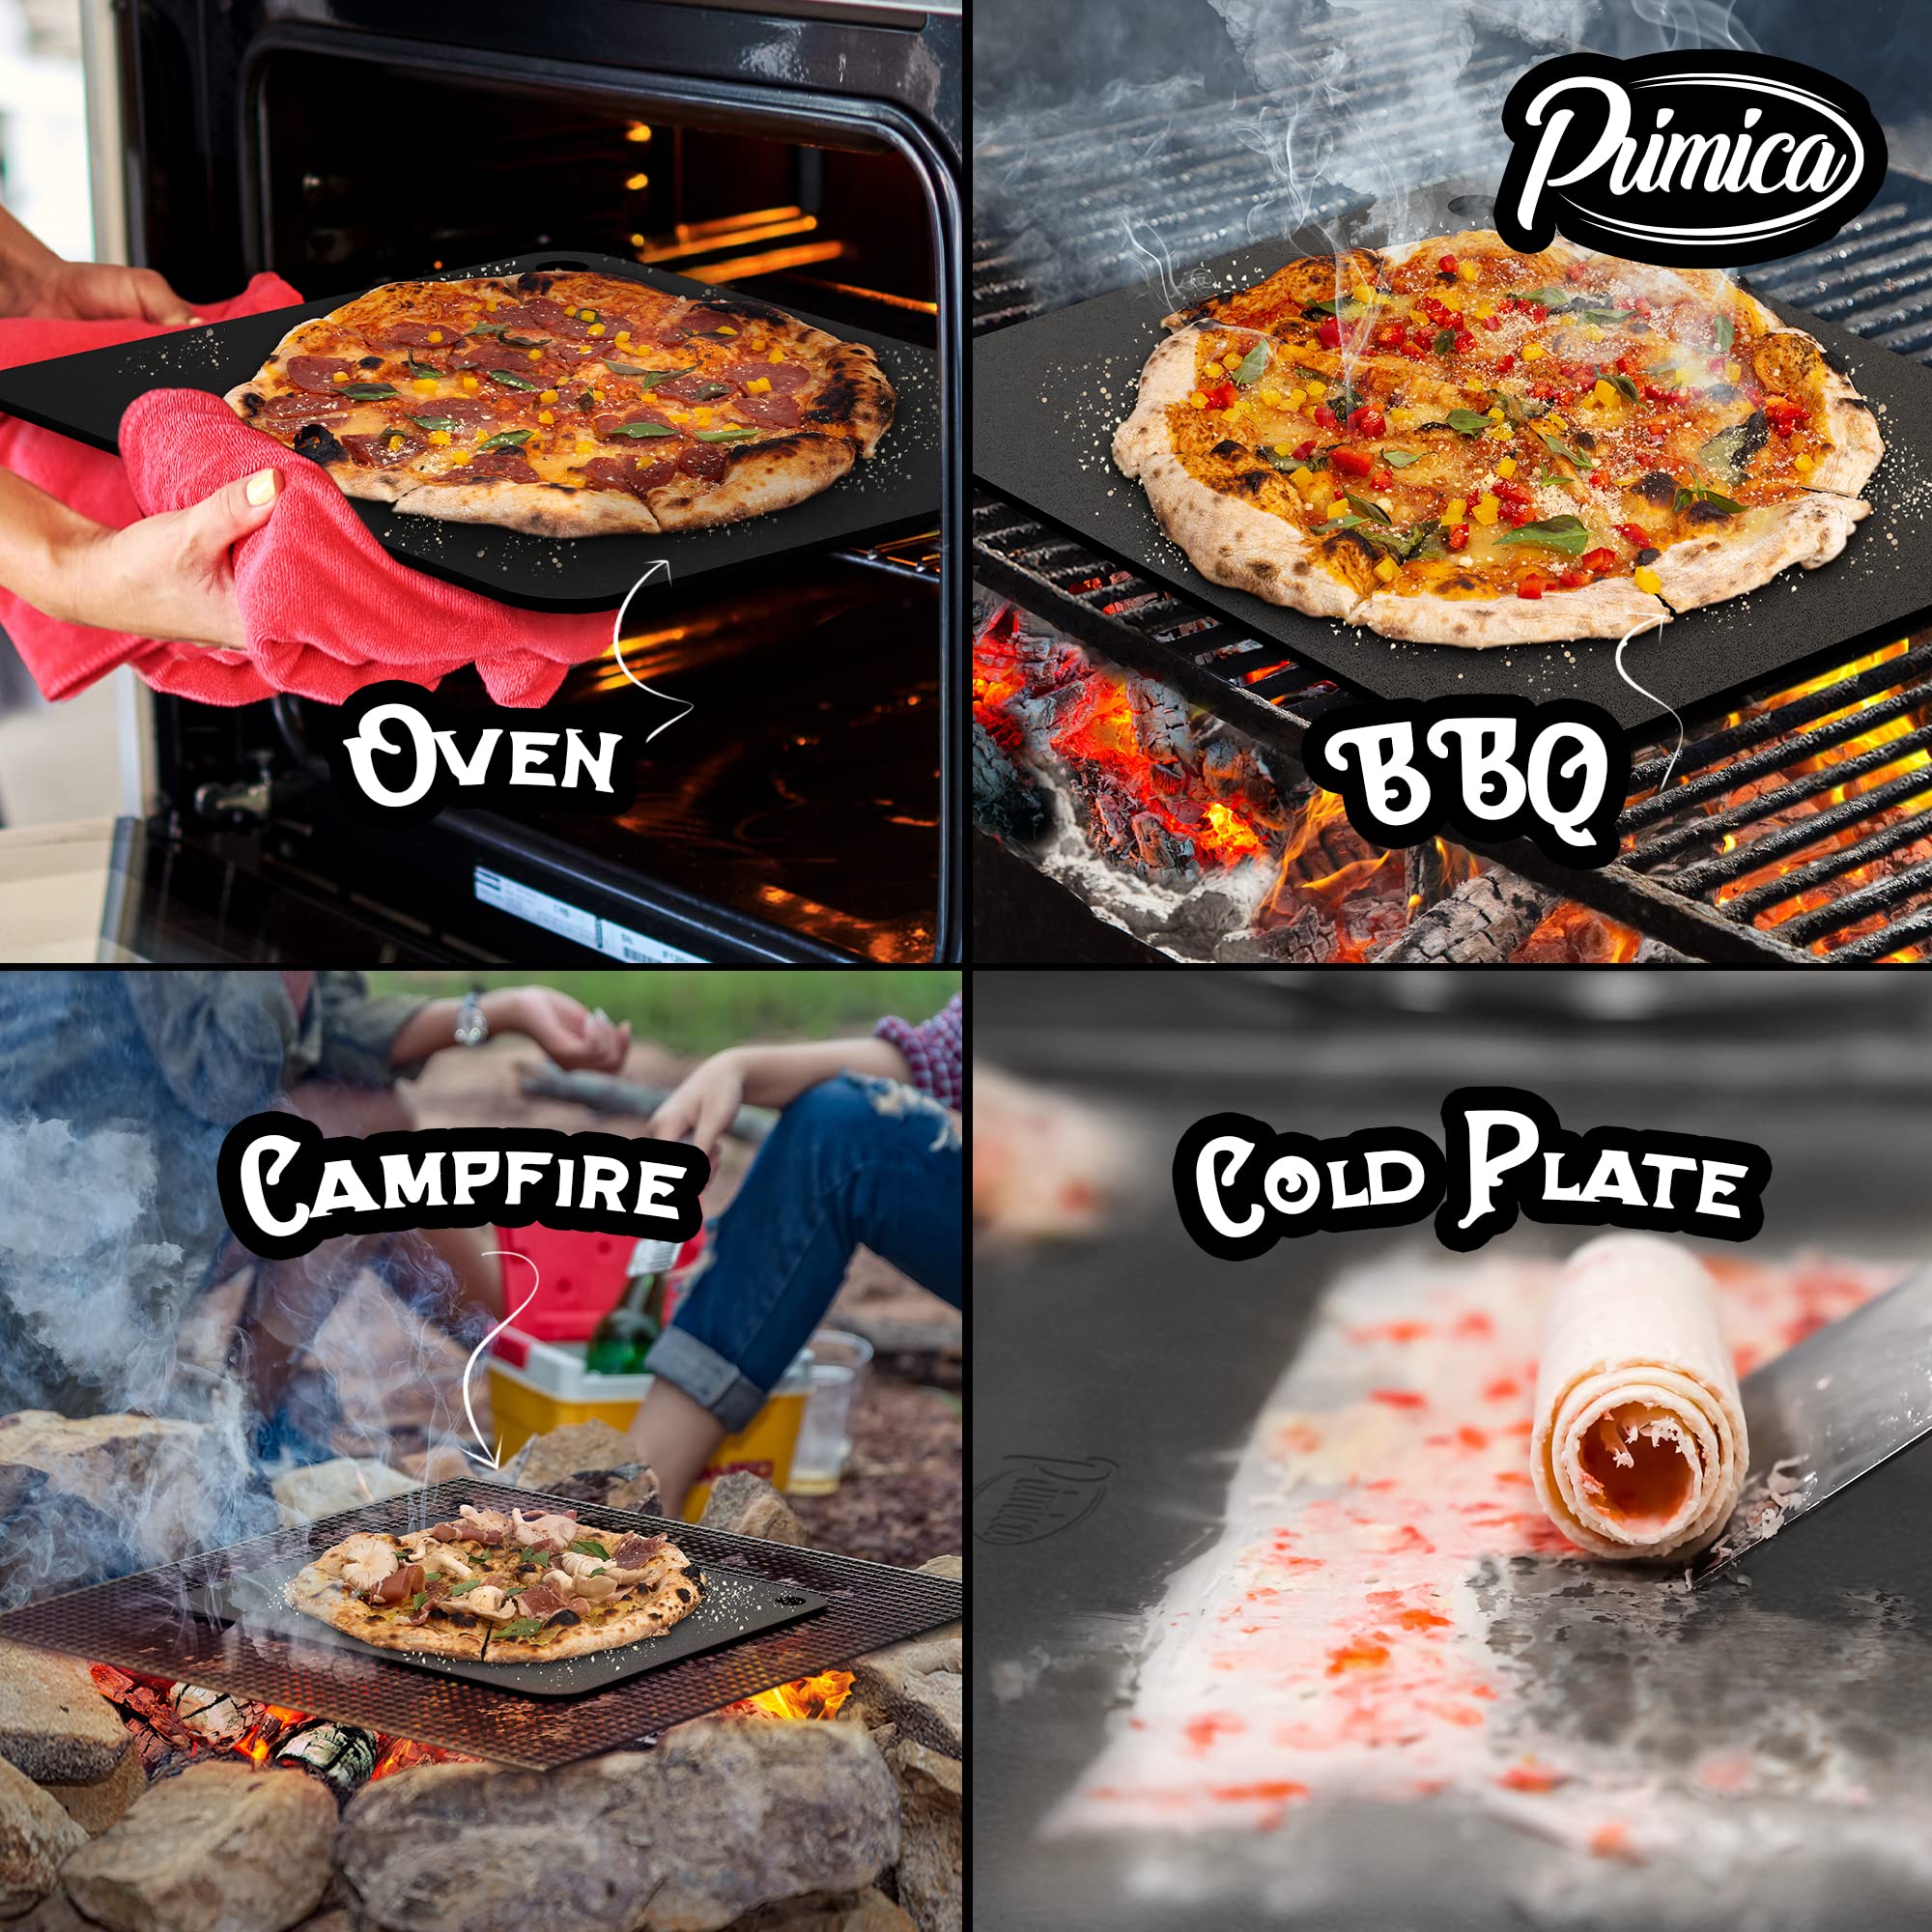 Primica Pizza Steel for Oven and Grill - 13.6” x 13.6” x ¼” Baking Steel Durable and High-Performance, Baking Stone for Regular Oven, Stone Oven or BBQ Grill, Bake a Perfect Crust at Home